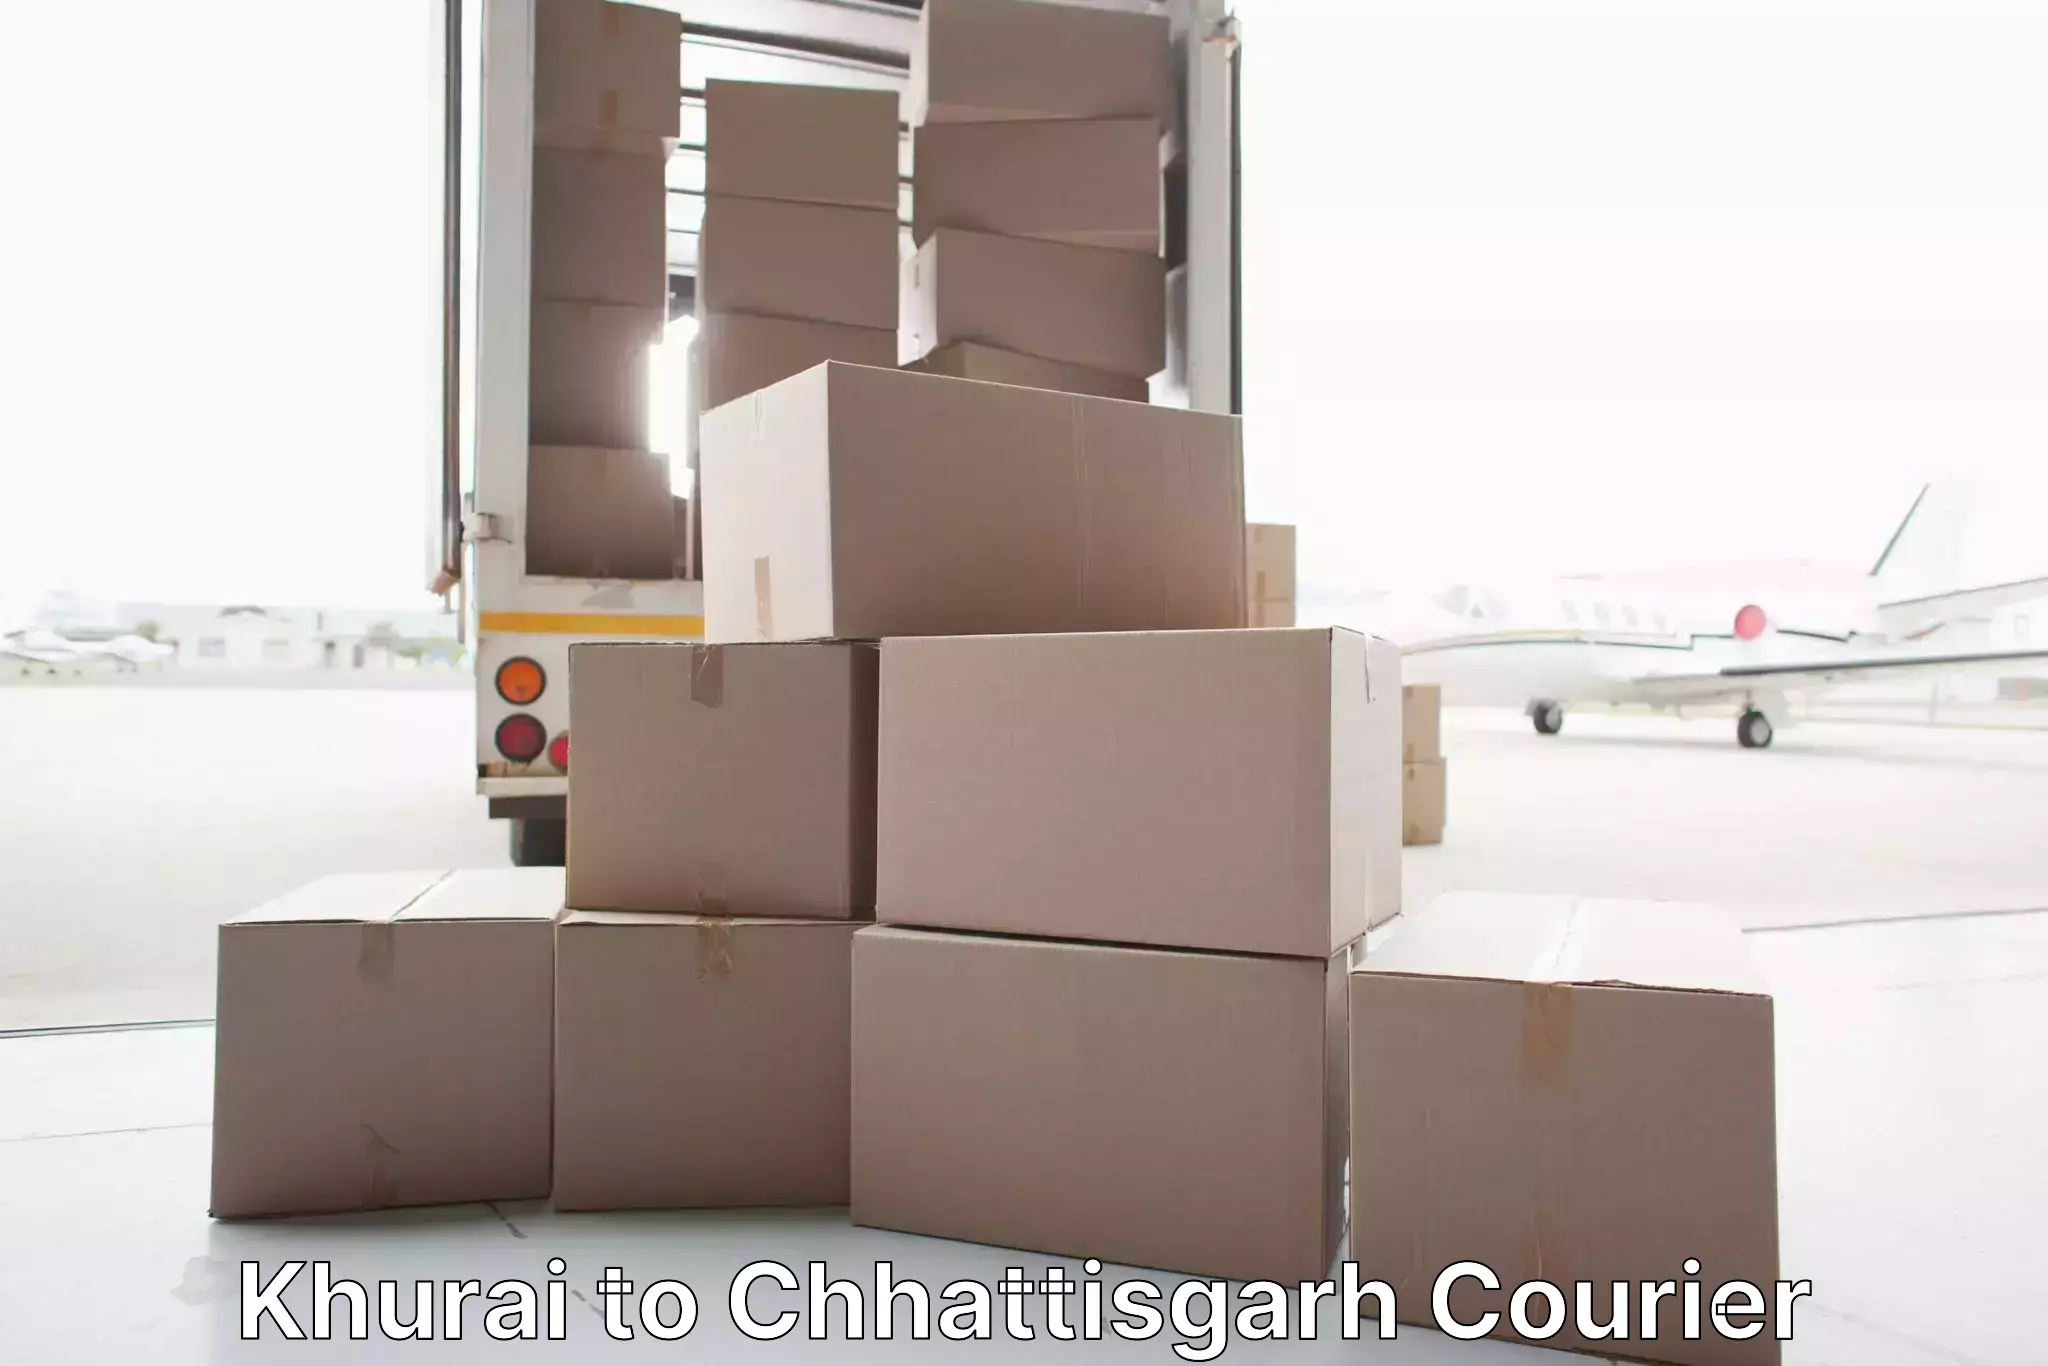 Reliable furniture transport in Khurai to Pendra